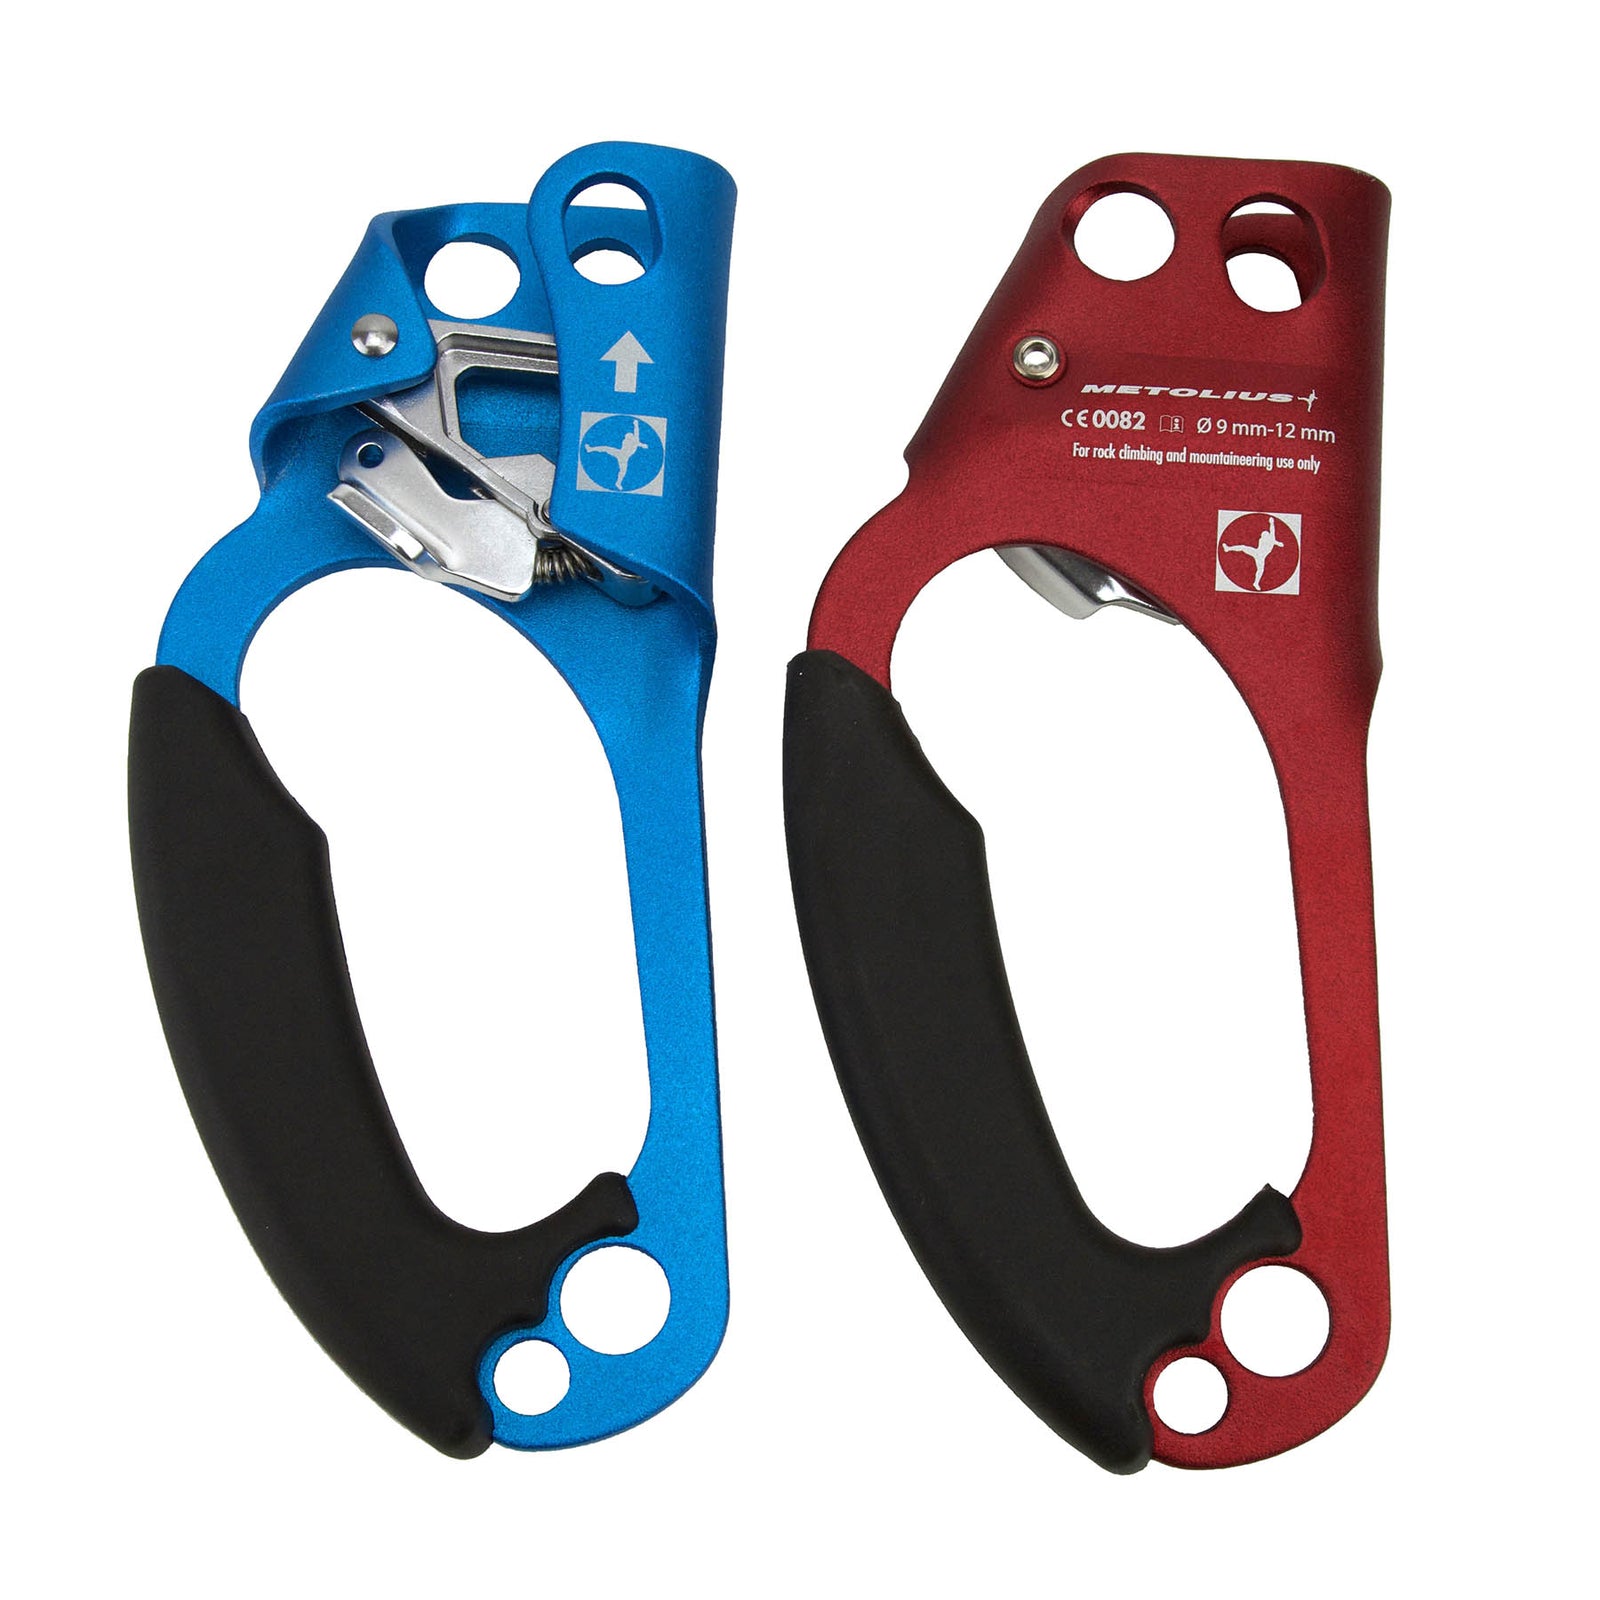 The metolius mountain products ascender, a photo of a pair